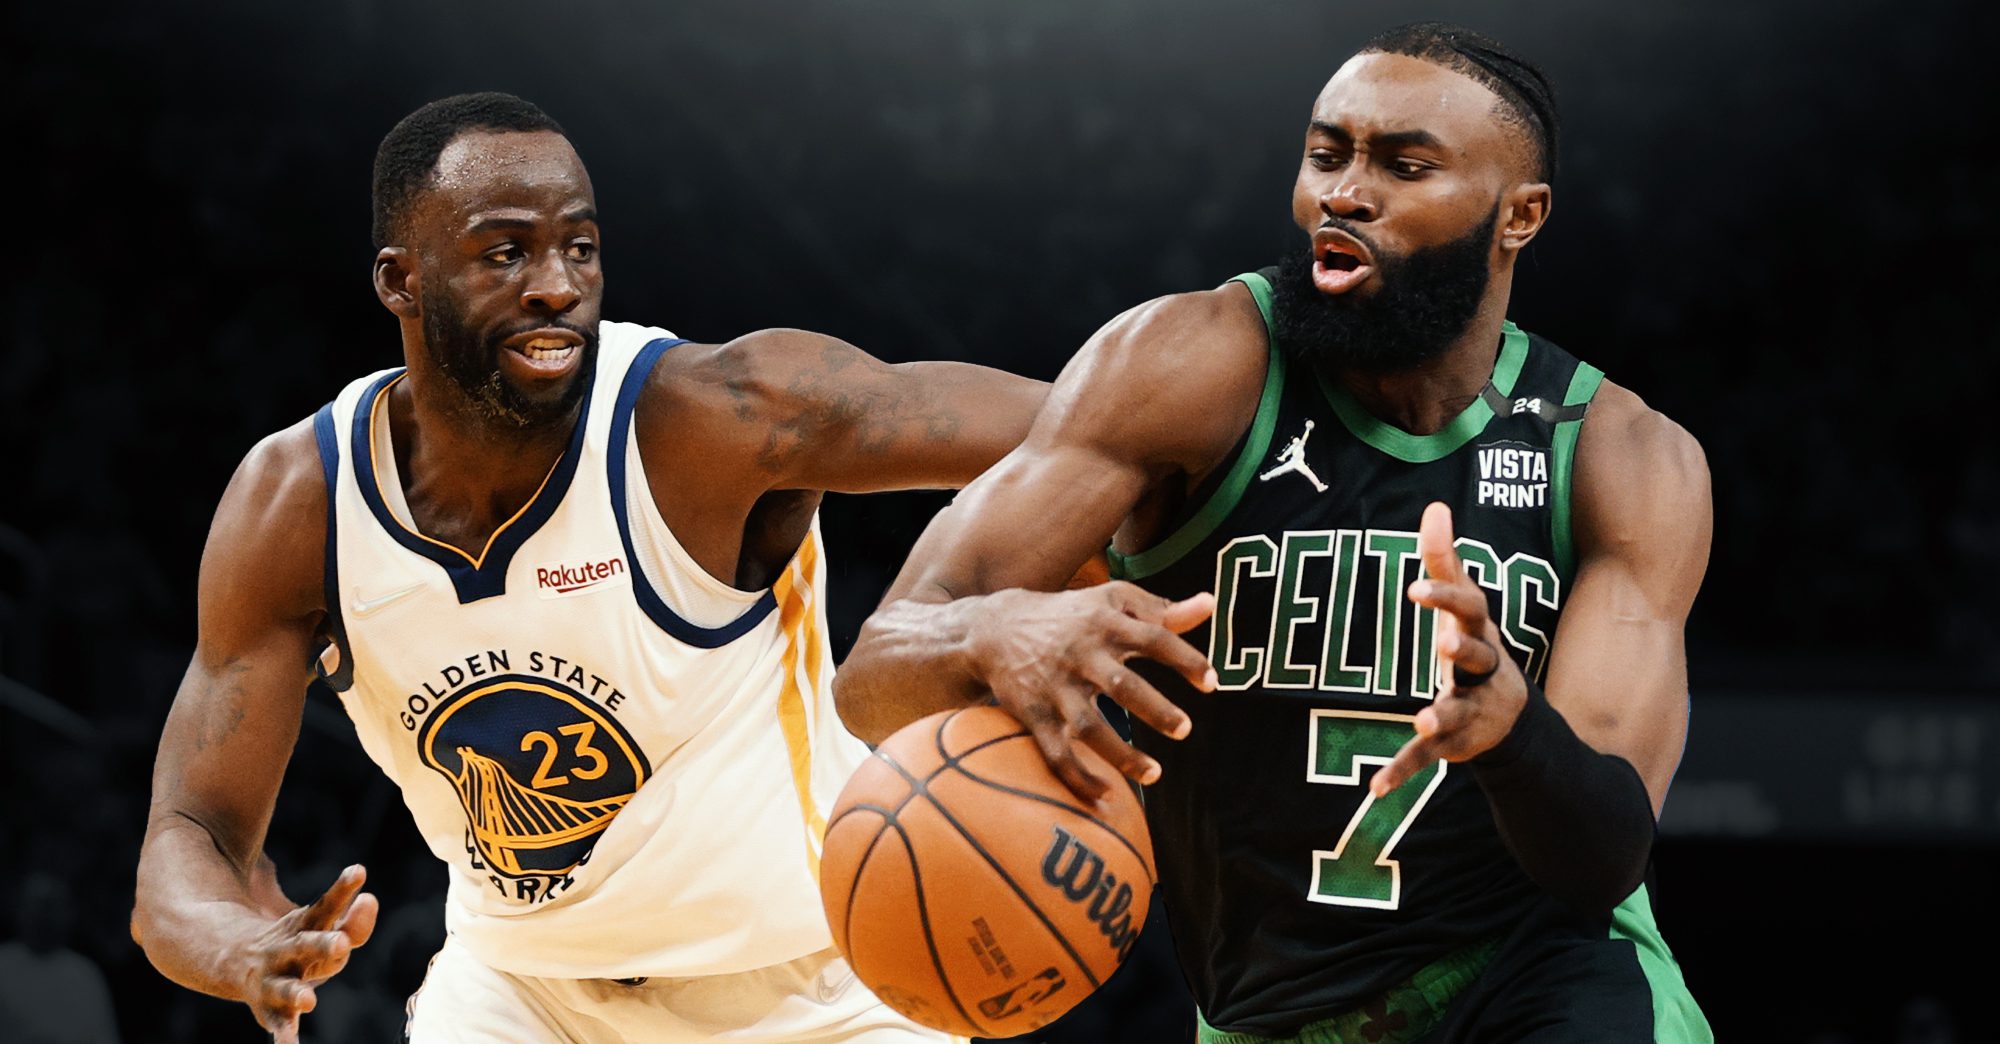 Jaylen Brown Reacts to Draymond Green’s ‘Disrespectful’ Defense in Blowout Win